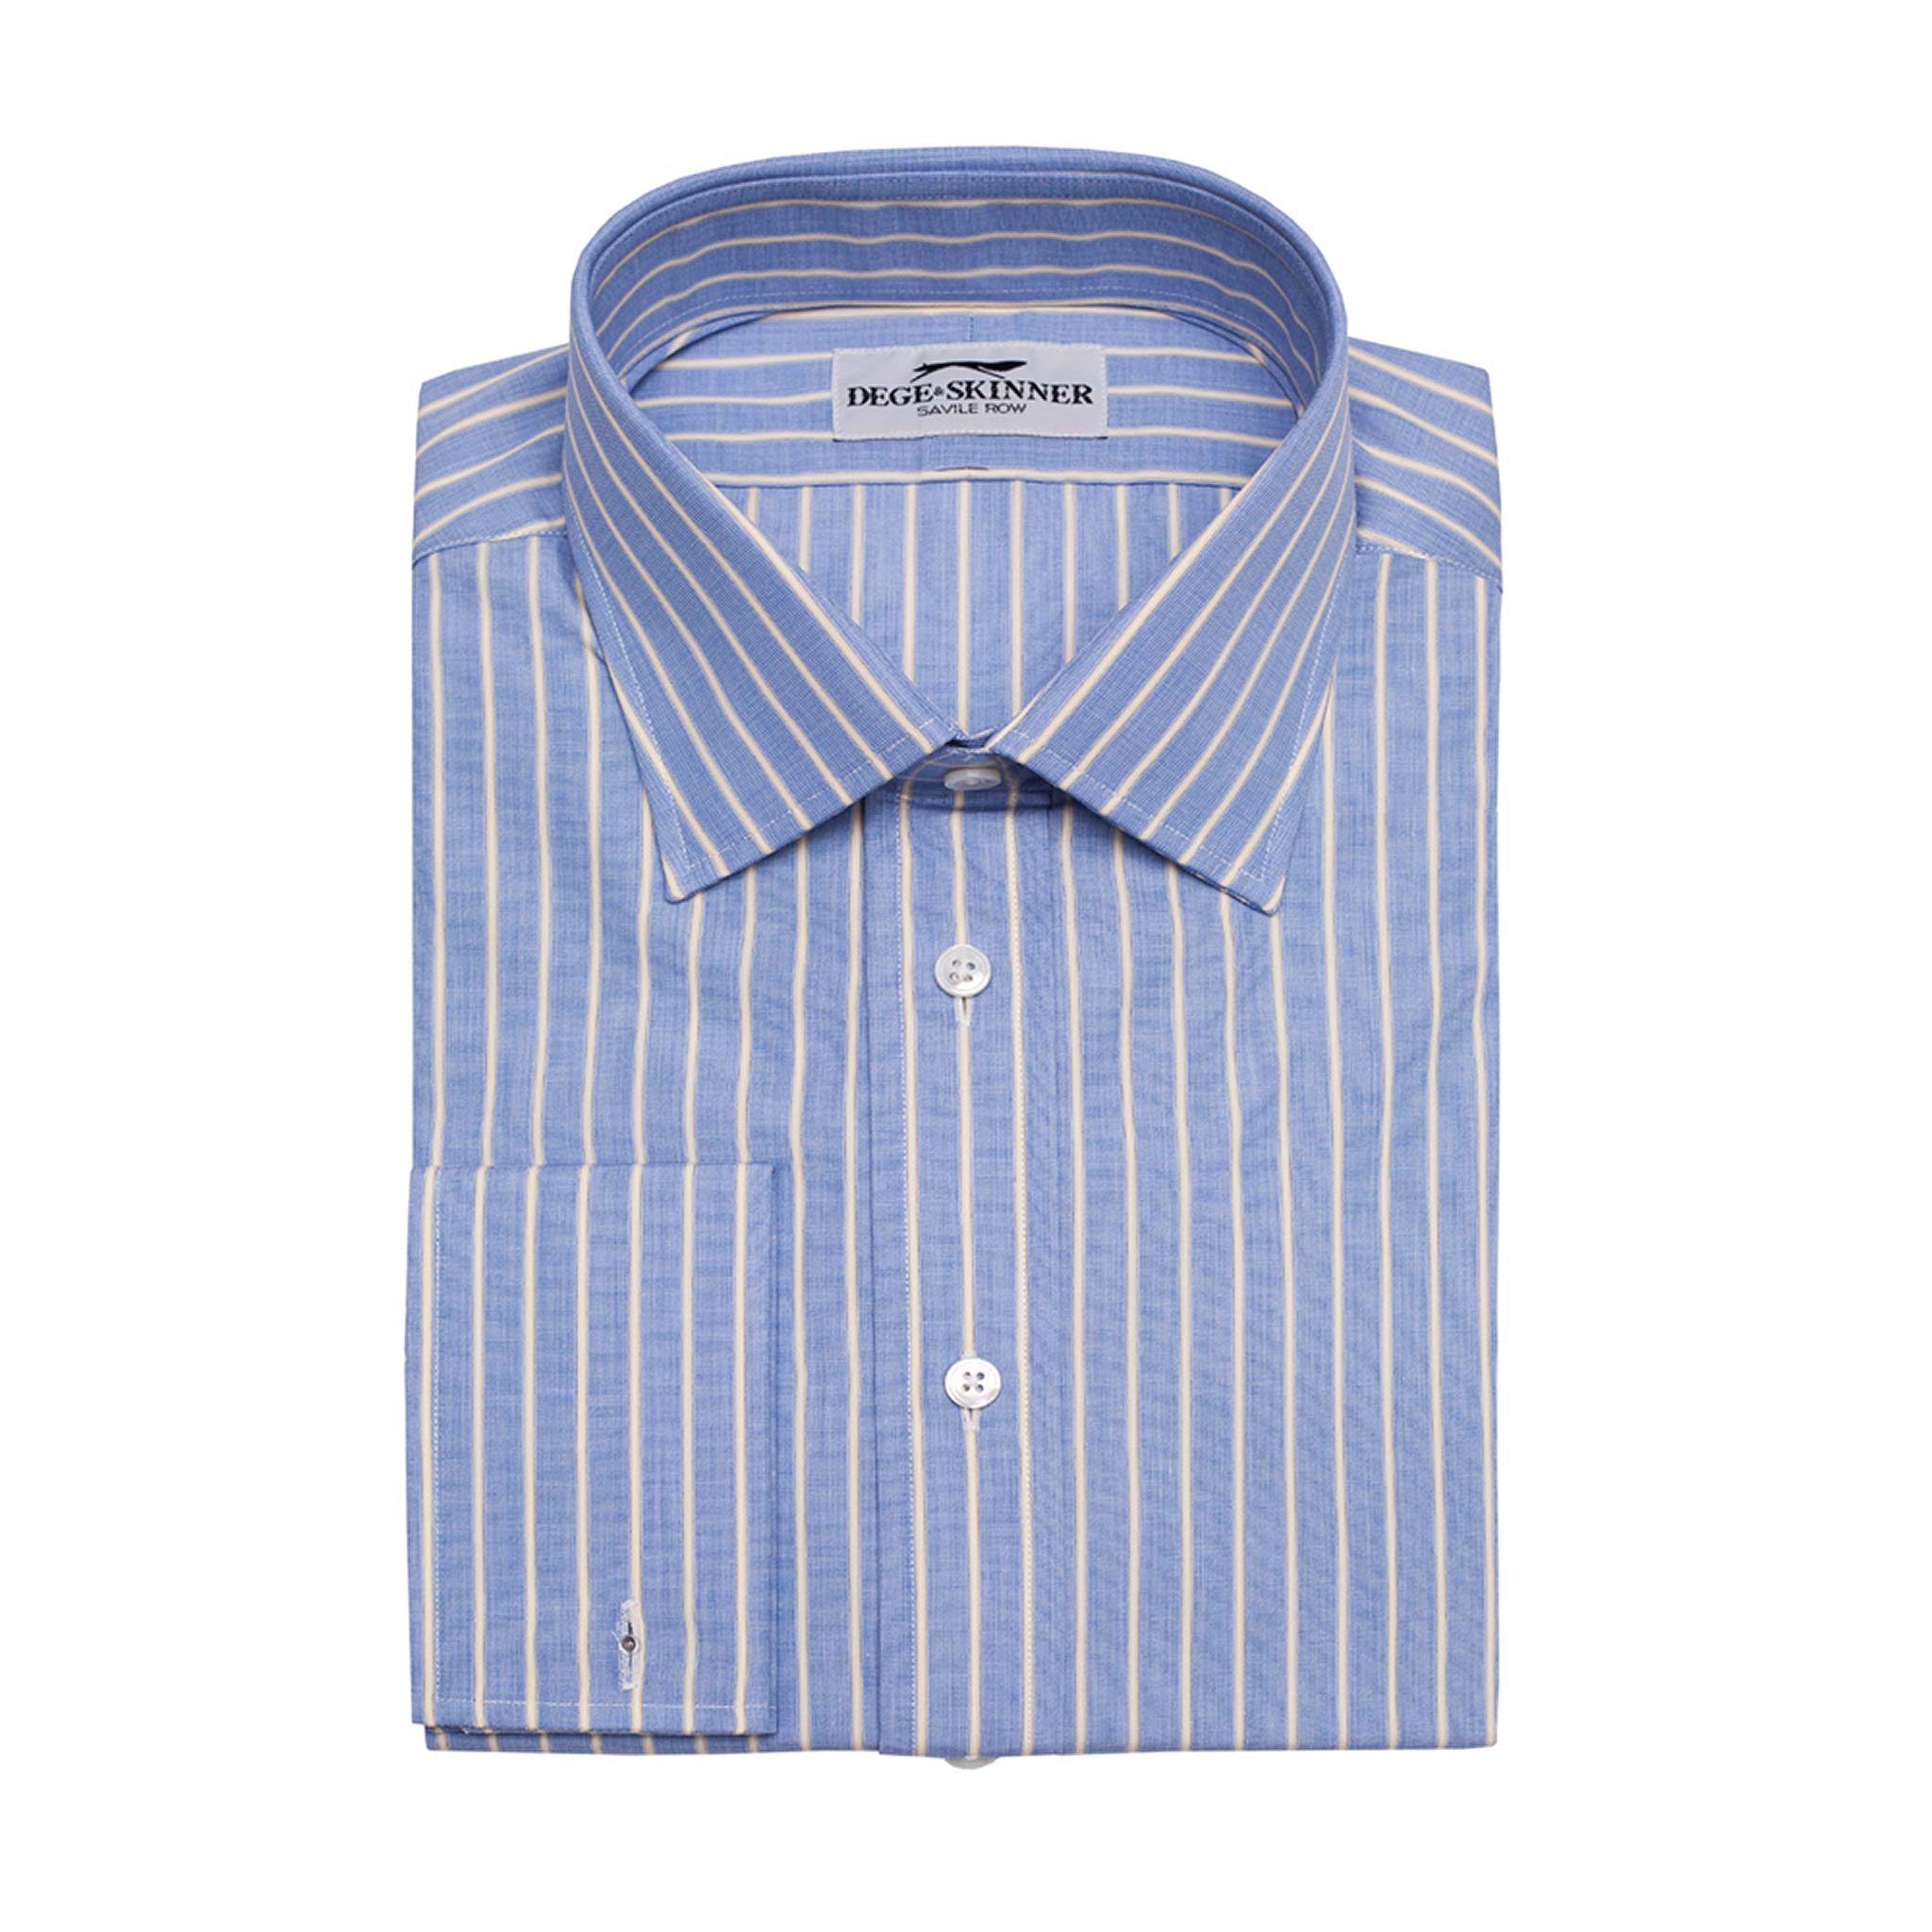 Blue Cotton Shirt With Narrow Yellow Stripe, Double French Cuff